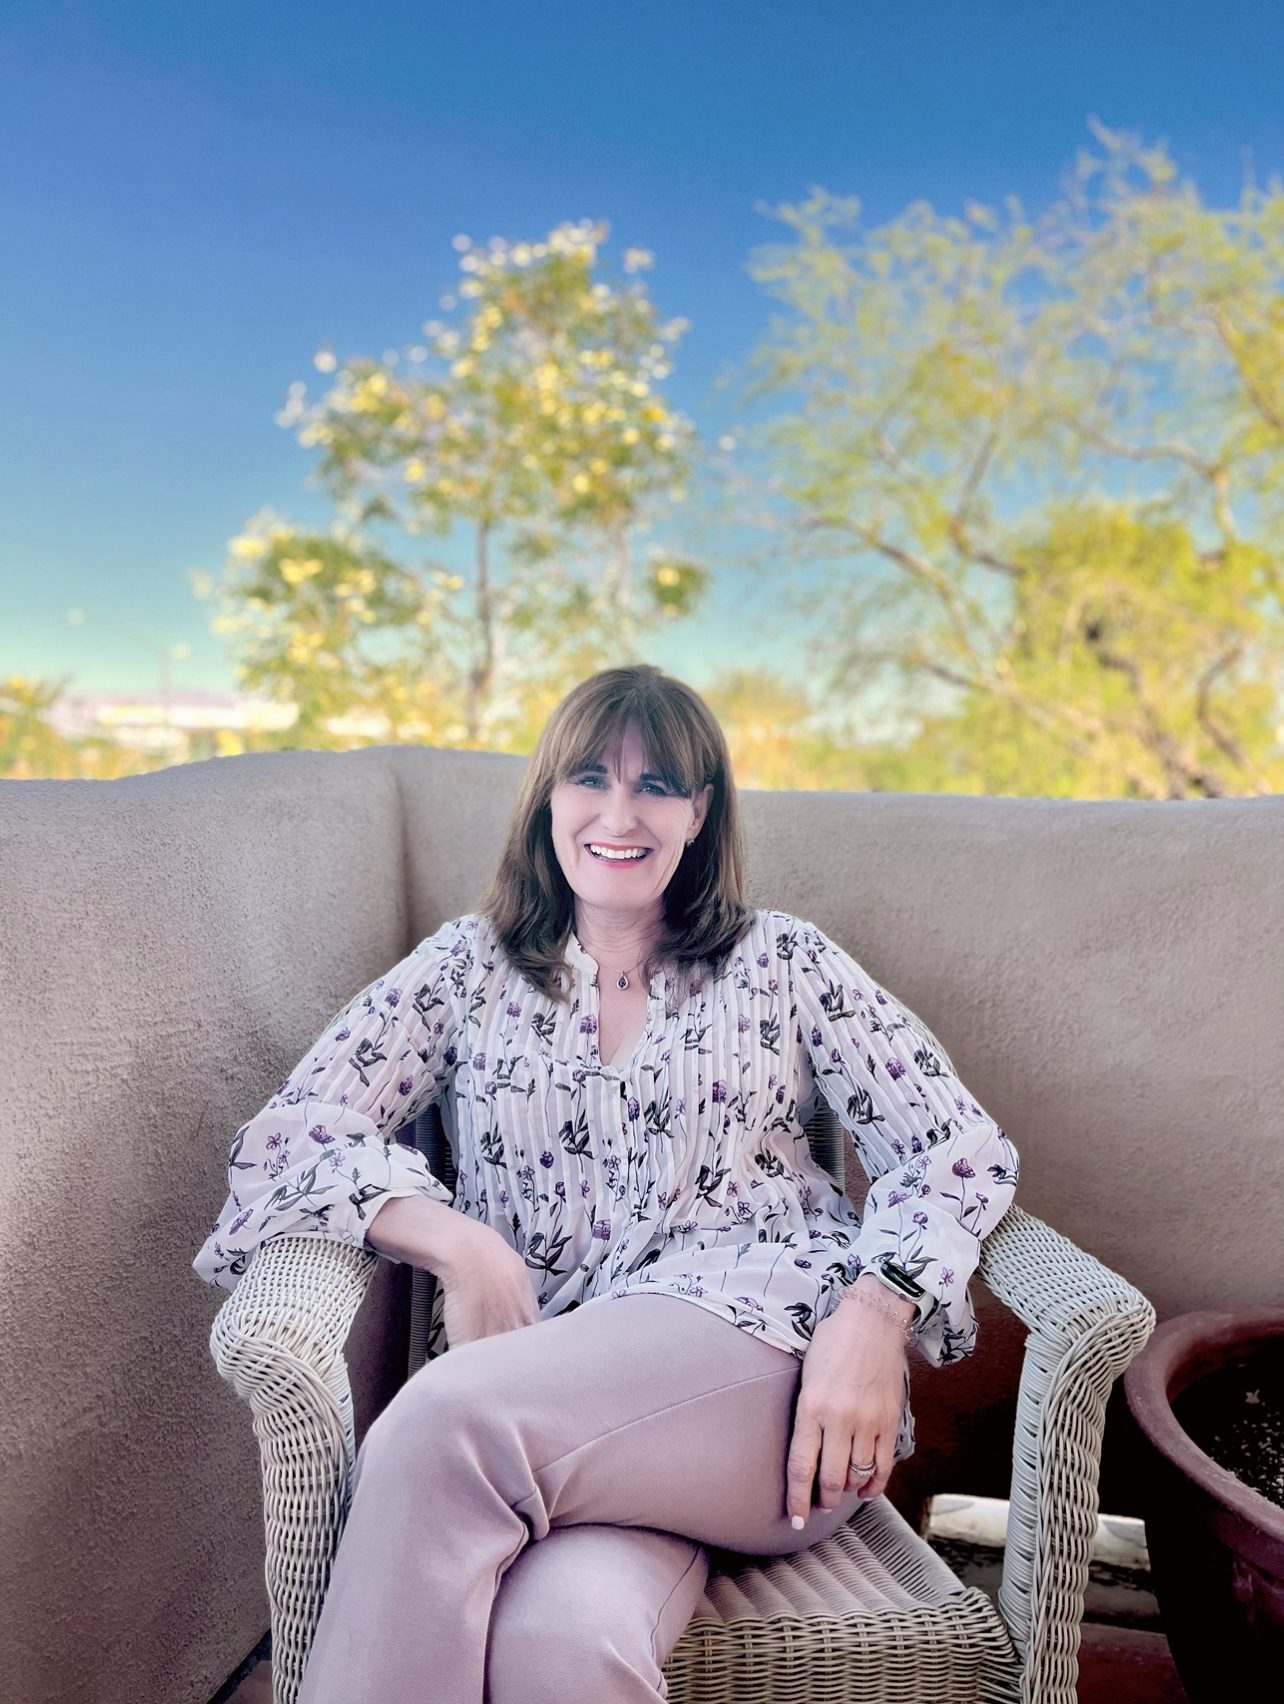 A smiling woman sitting on an outdoor sofa with trees in the background.